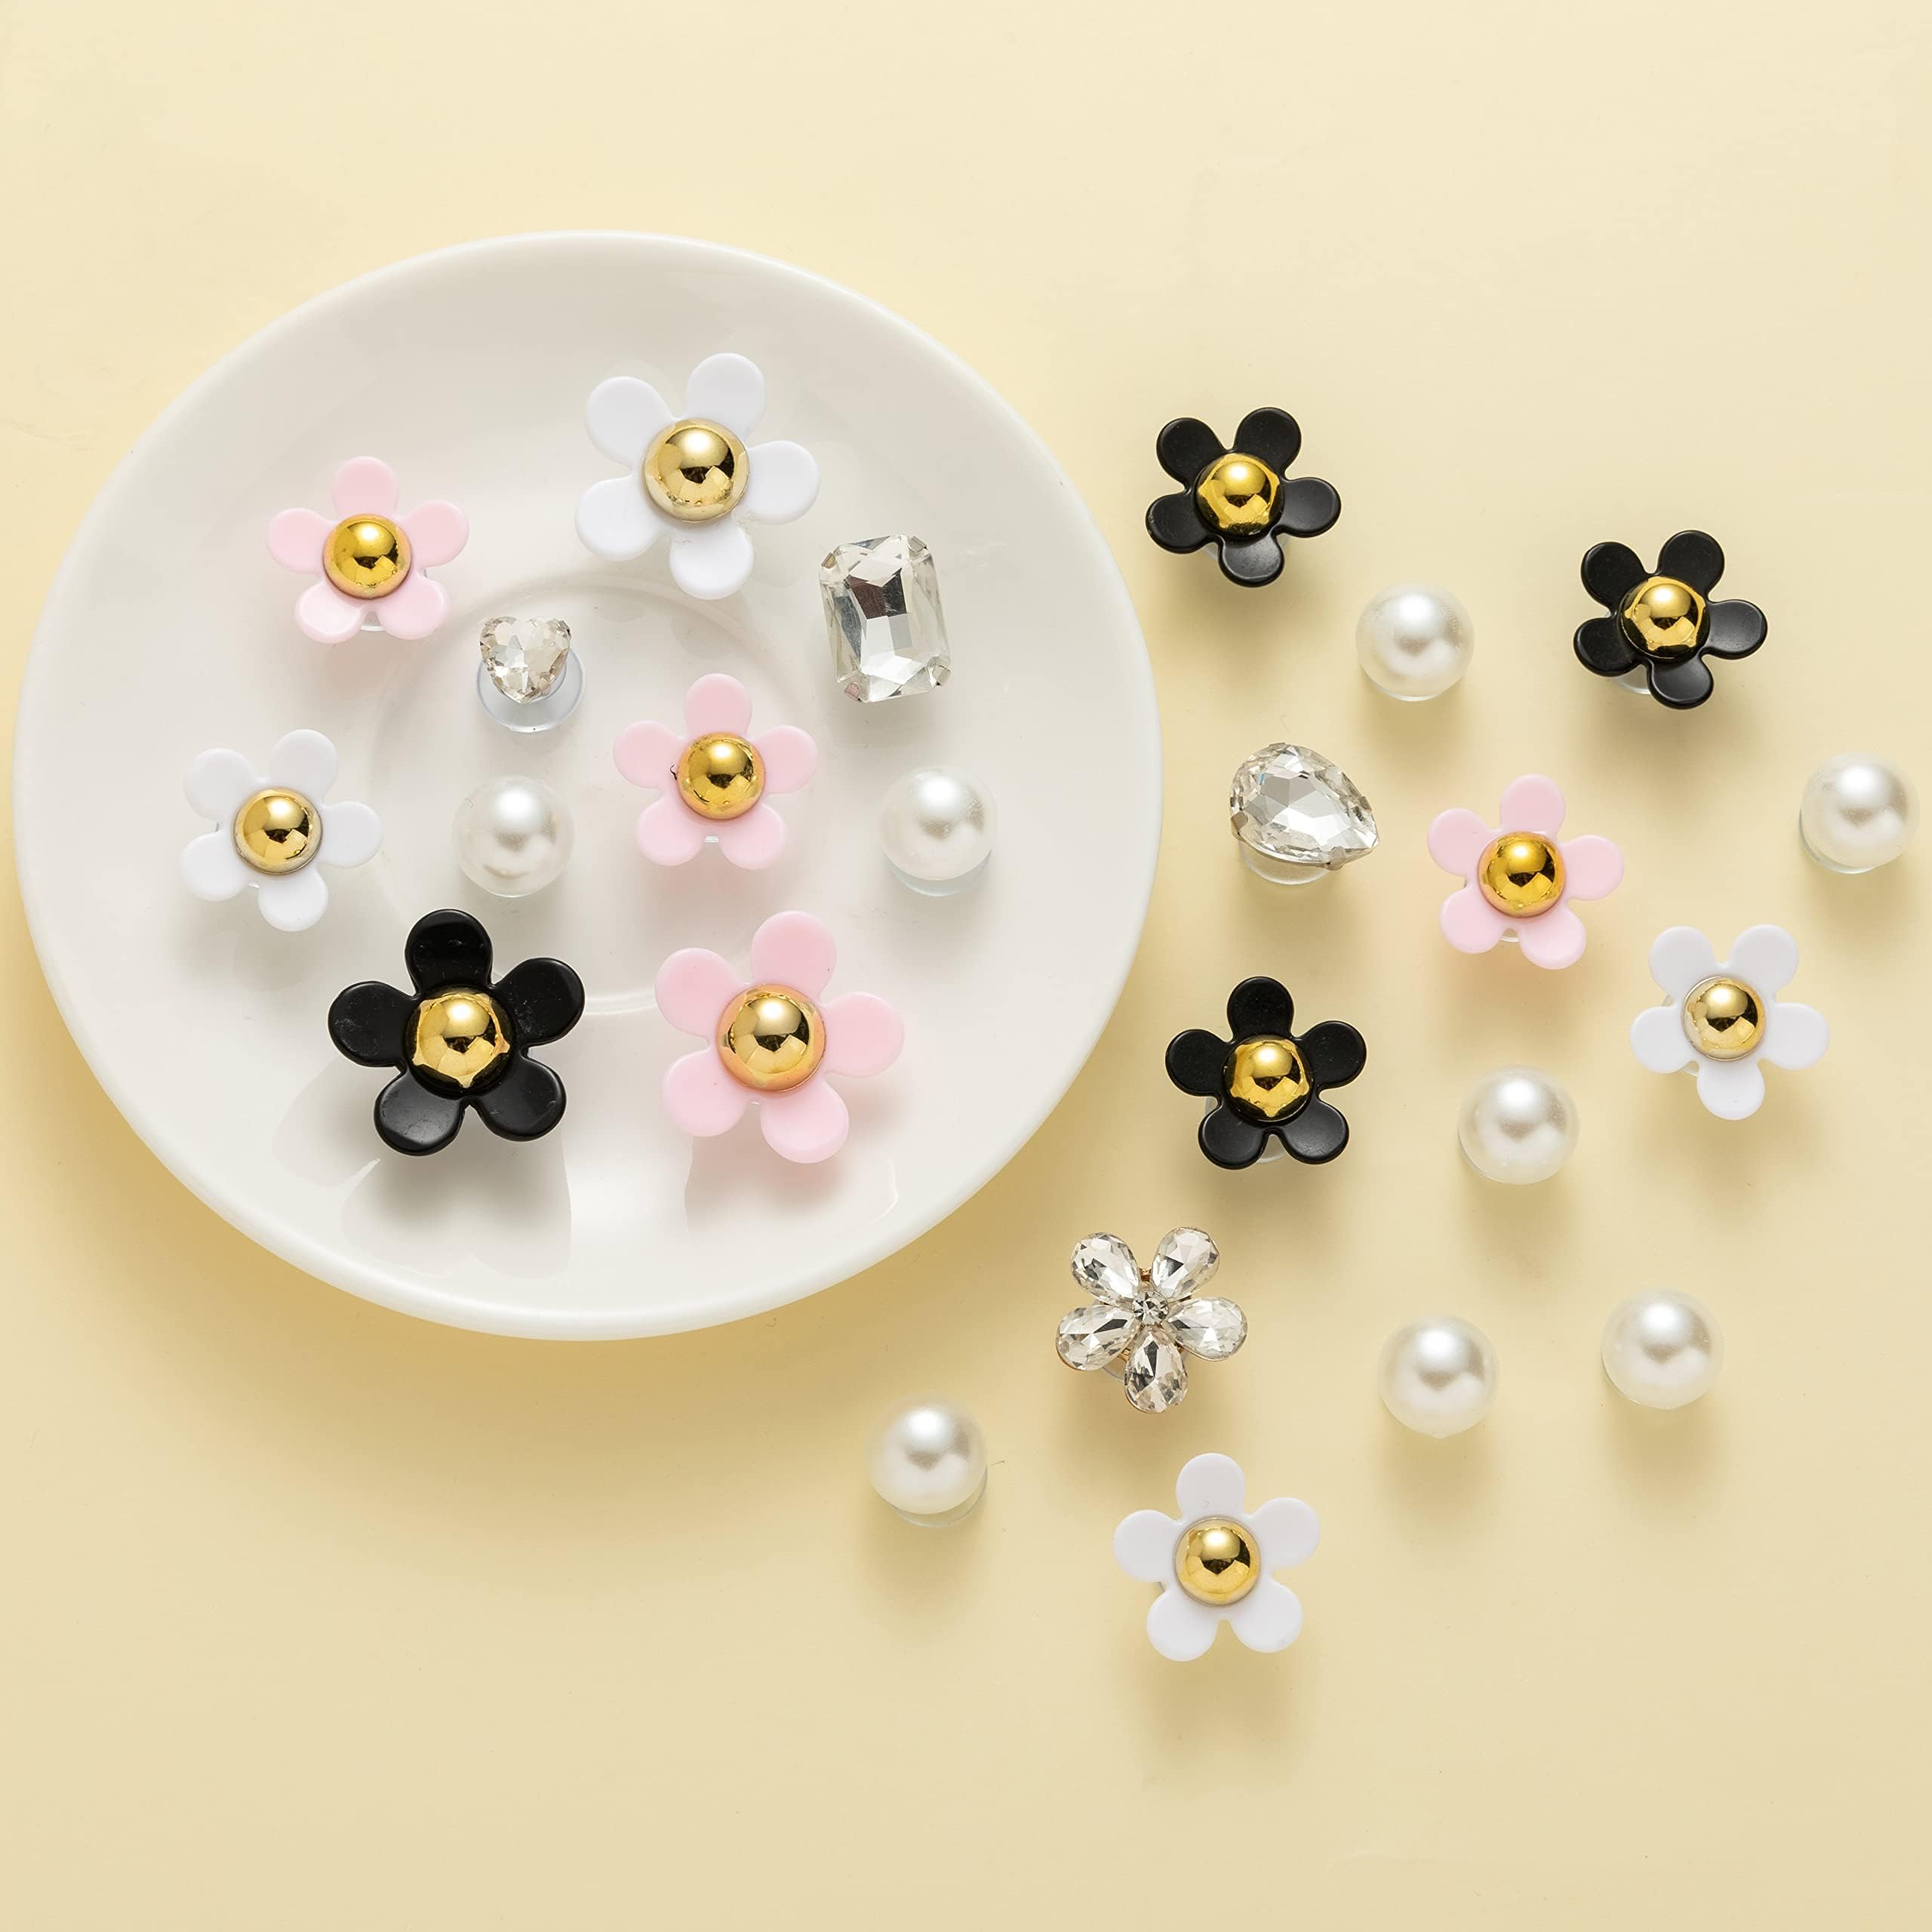 NEVEGE Shoe Charms 24PC, Flower Charms with Crystal Rhinestone & Pearl PVC, Cute Decoration for Girls Shoes